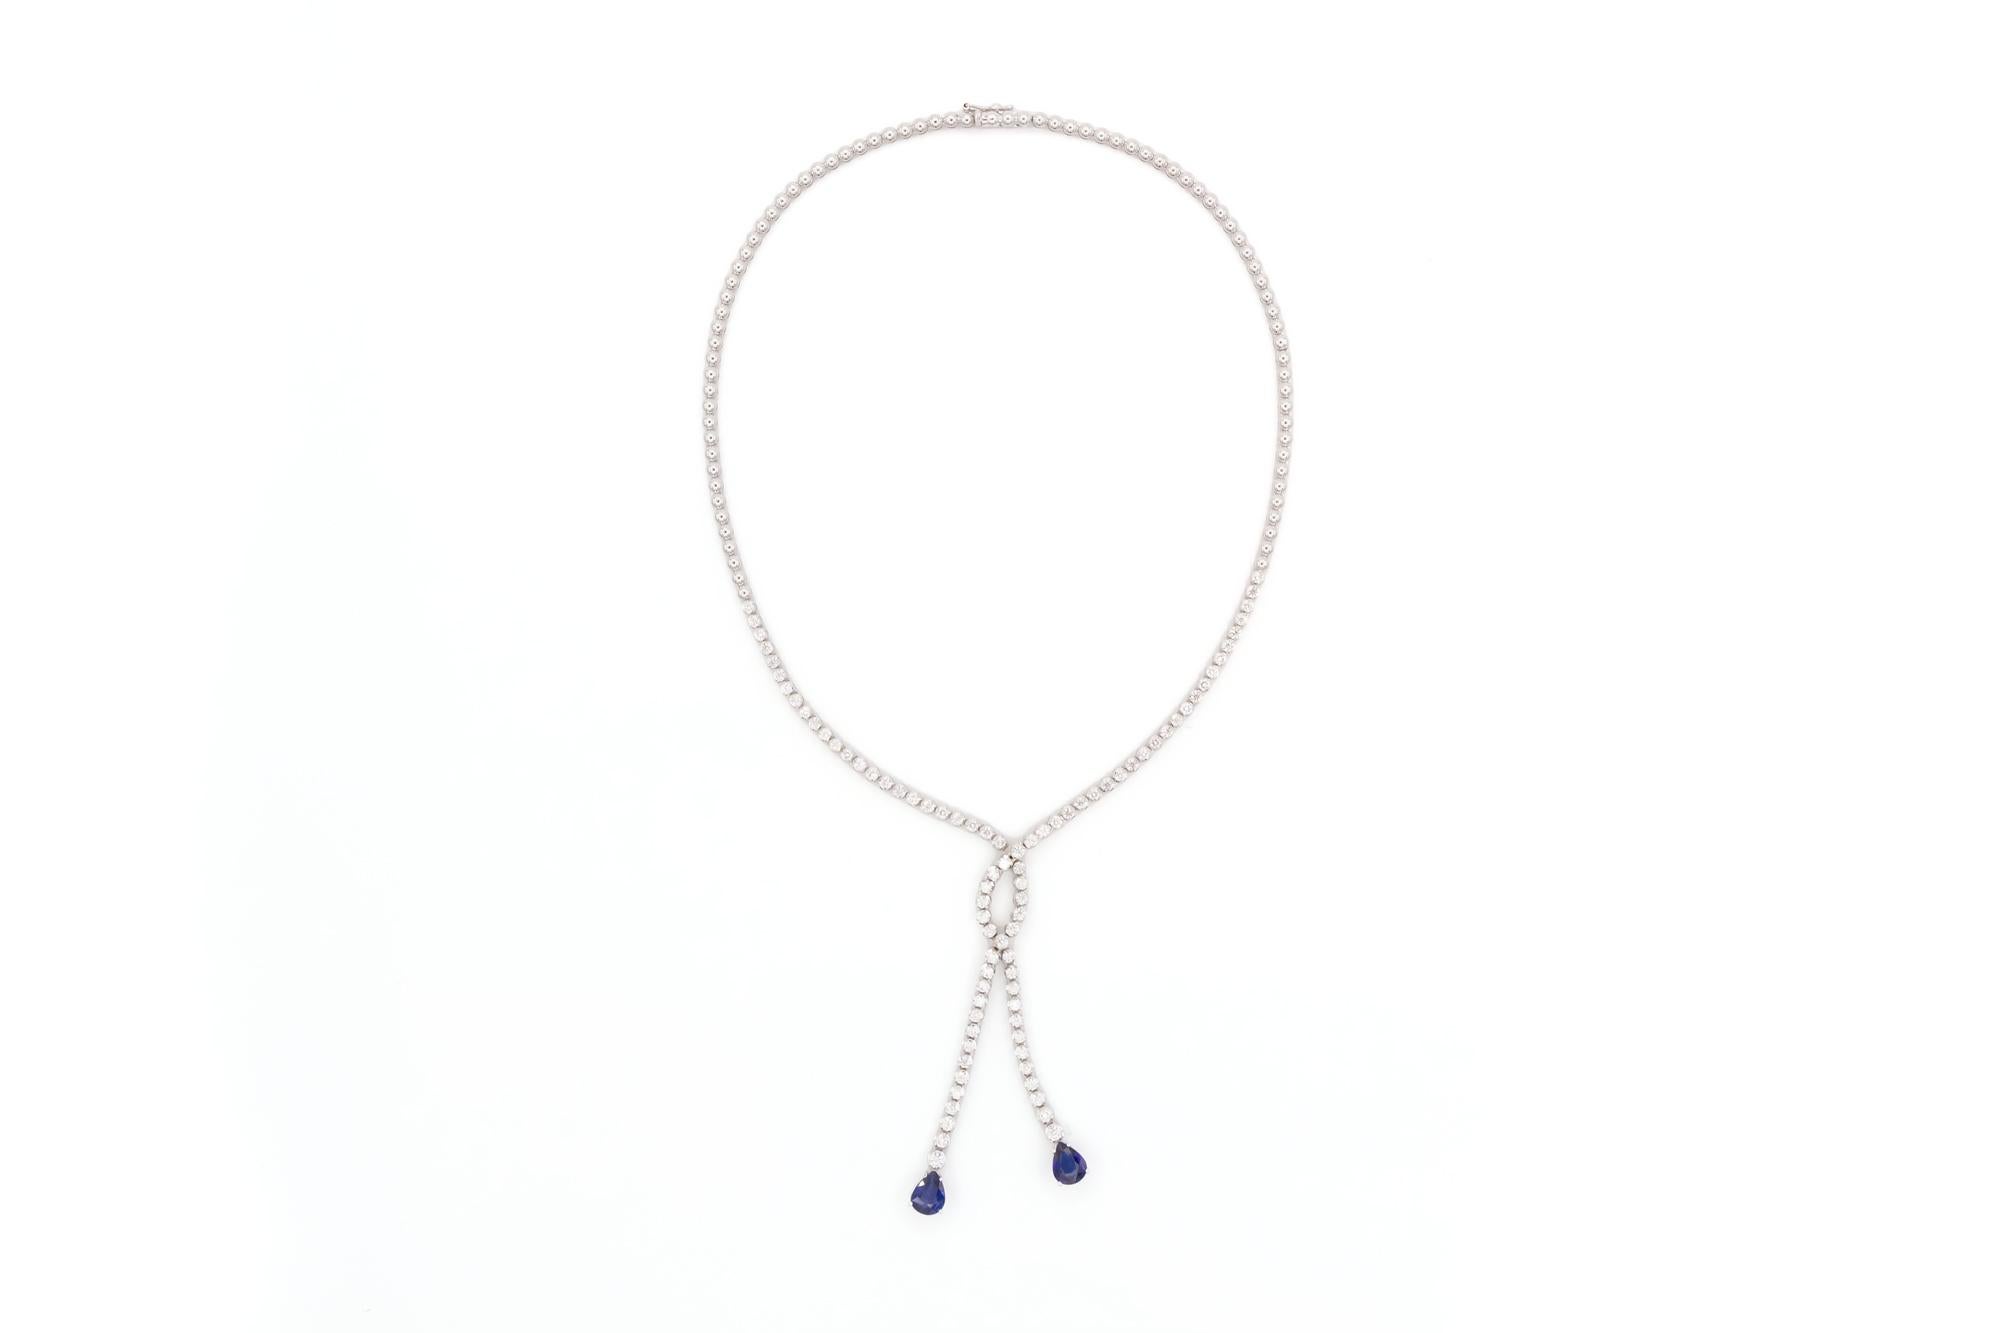 We are pleased to offer this 18k White Gold Diamond & Sapphire Double Drop Necklace. A timeless design crafted from 18k white gold, dazzling round brilliant cut diamonds and pear shape sapphires this stunning necklace features an estimated 3.11ctw